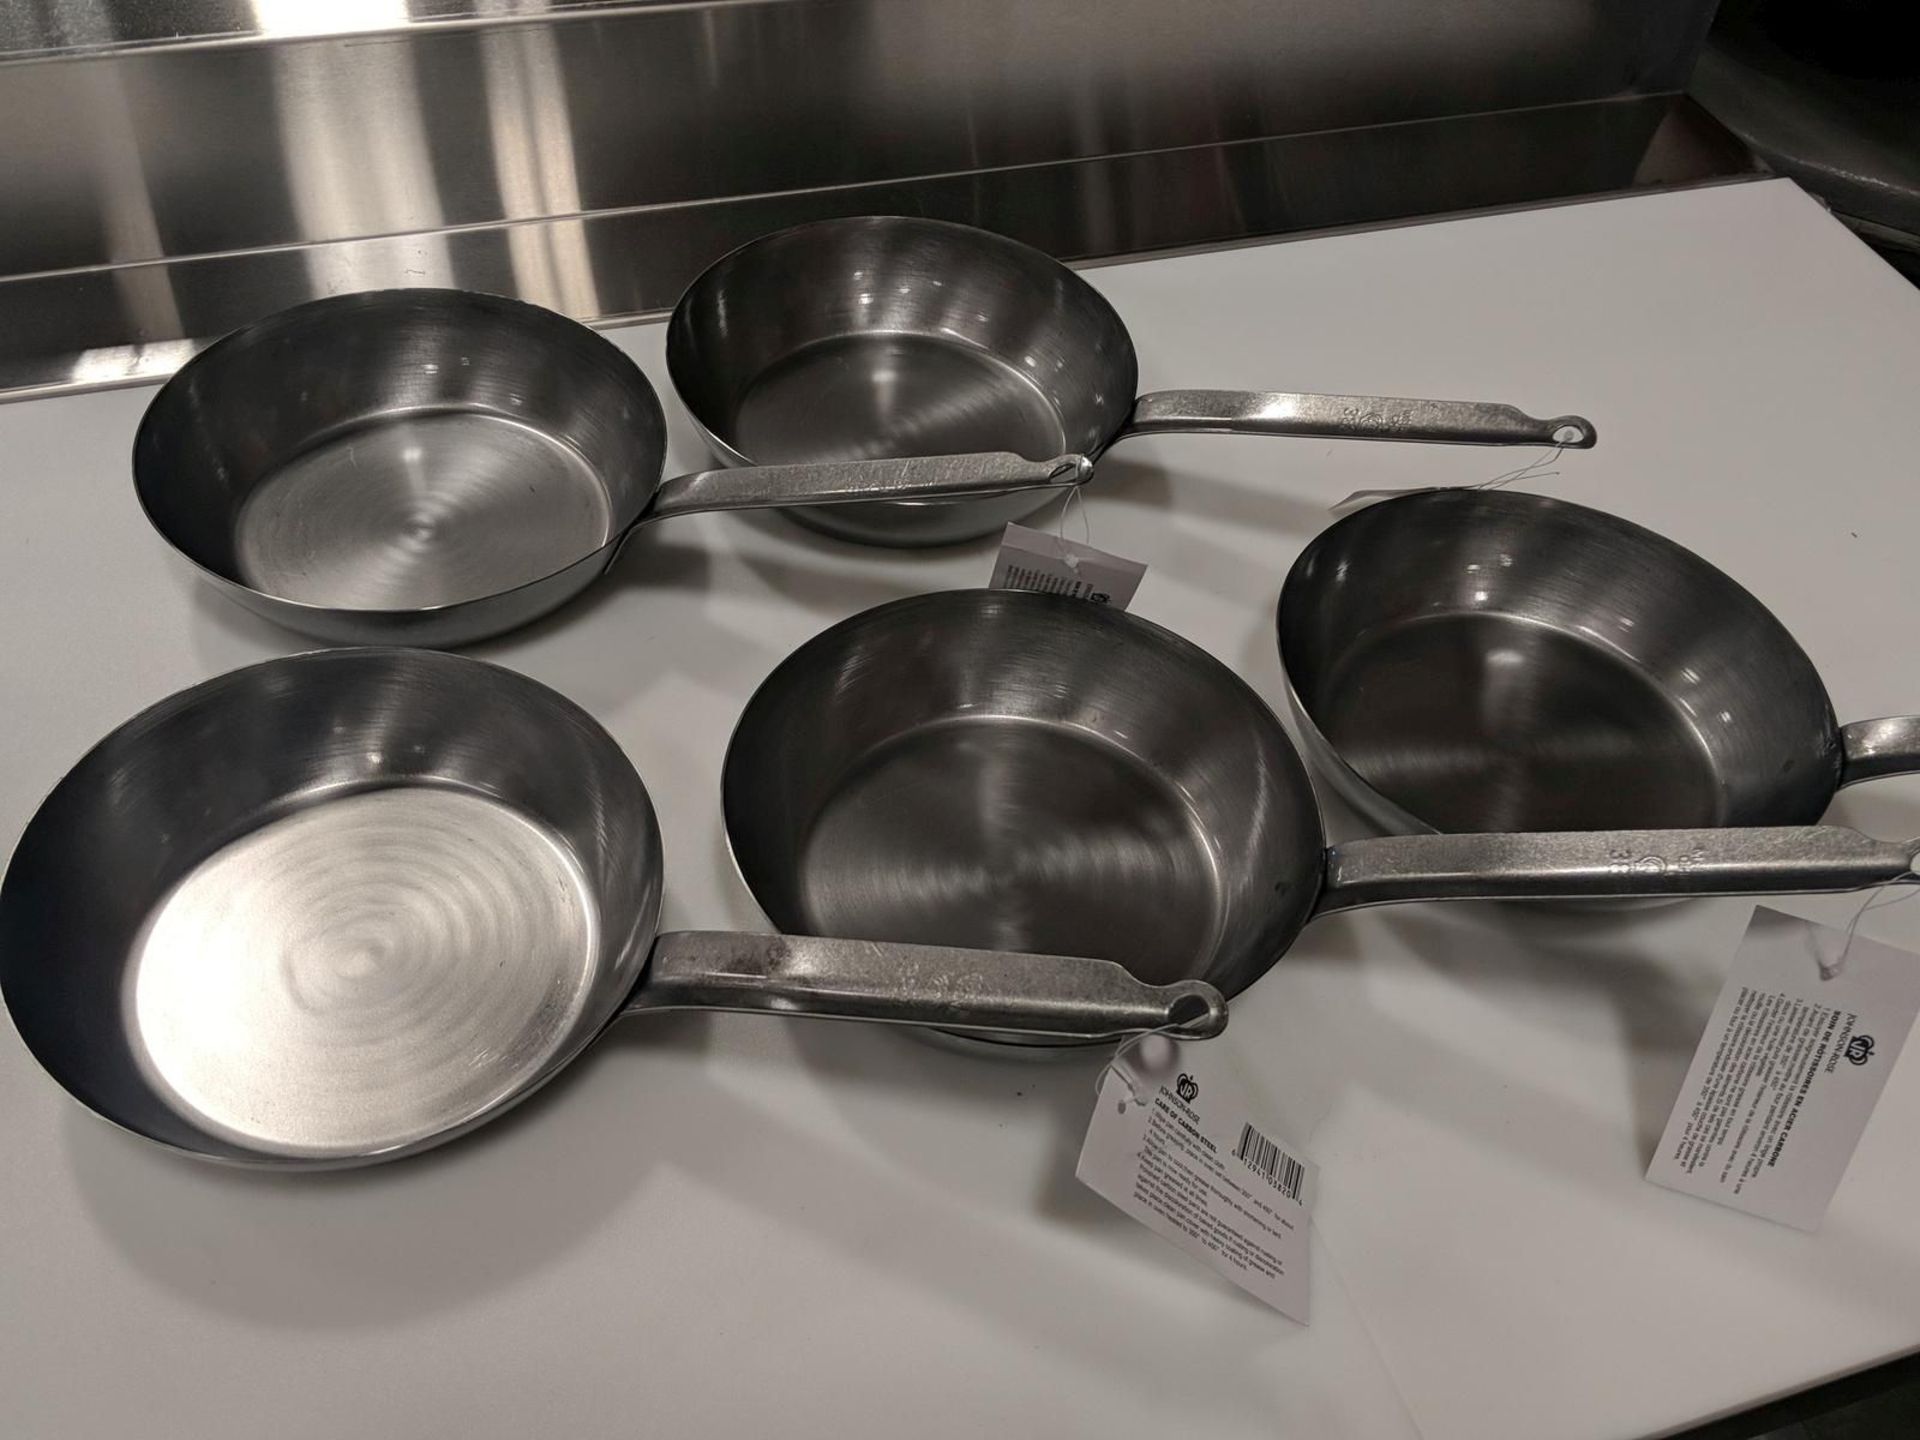 8.25" Carbon Steel Fry Pans, Induction Capable - Lot of 5 - Image 2 of 2